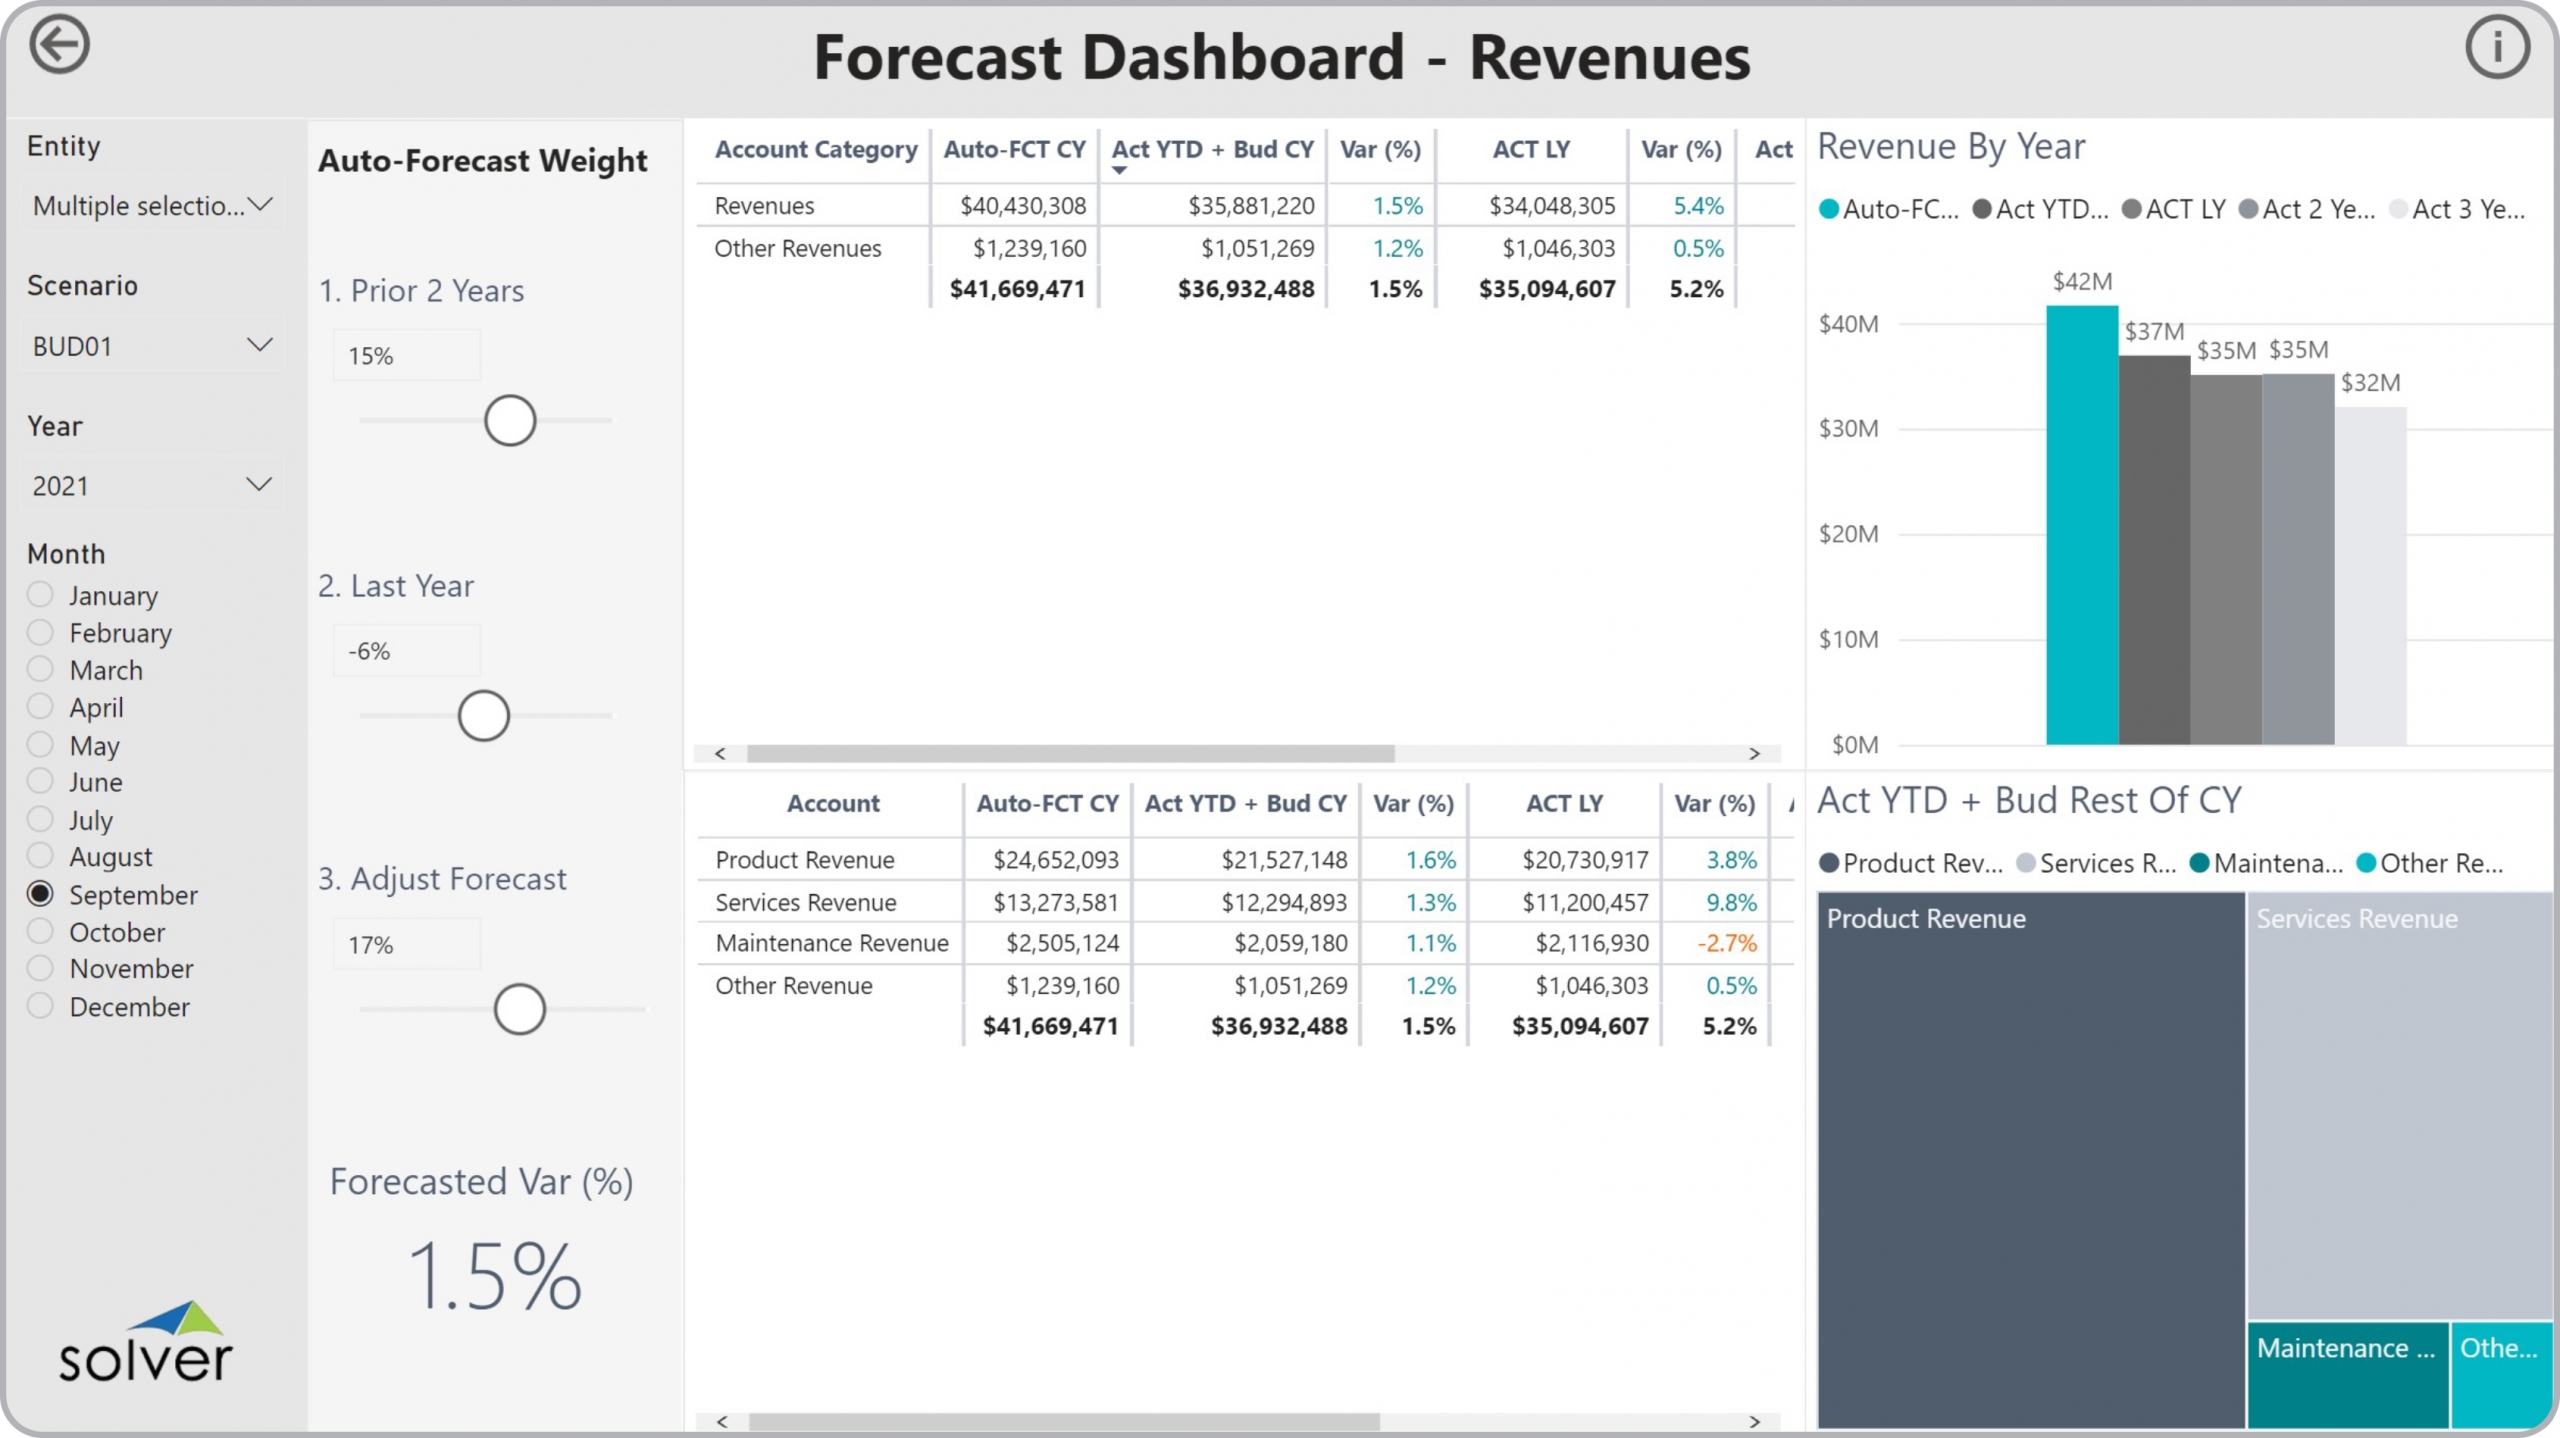 Example of a Revenue Simulation Dashboard to Streamline the Modelling and Forecasting Process